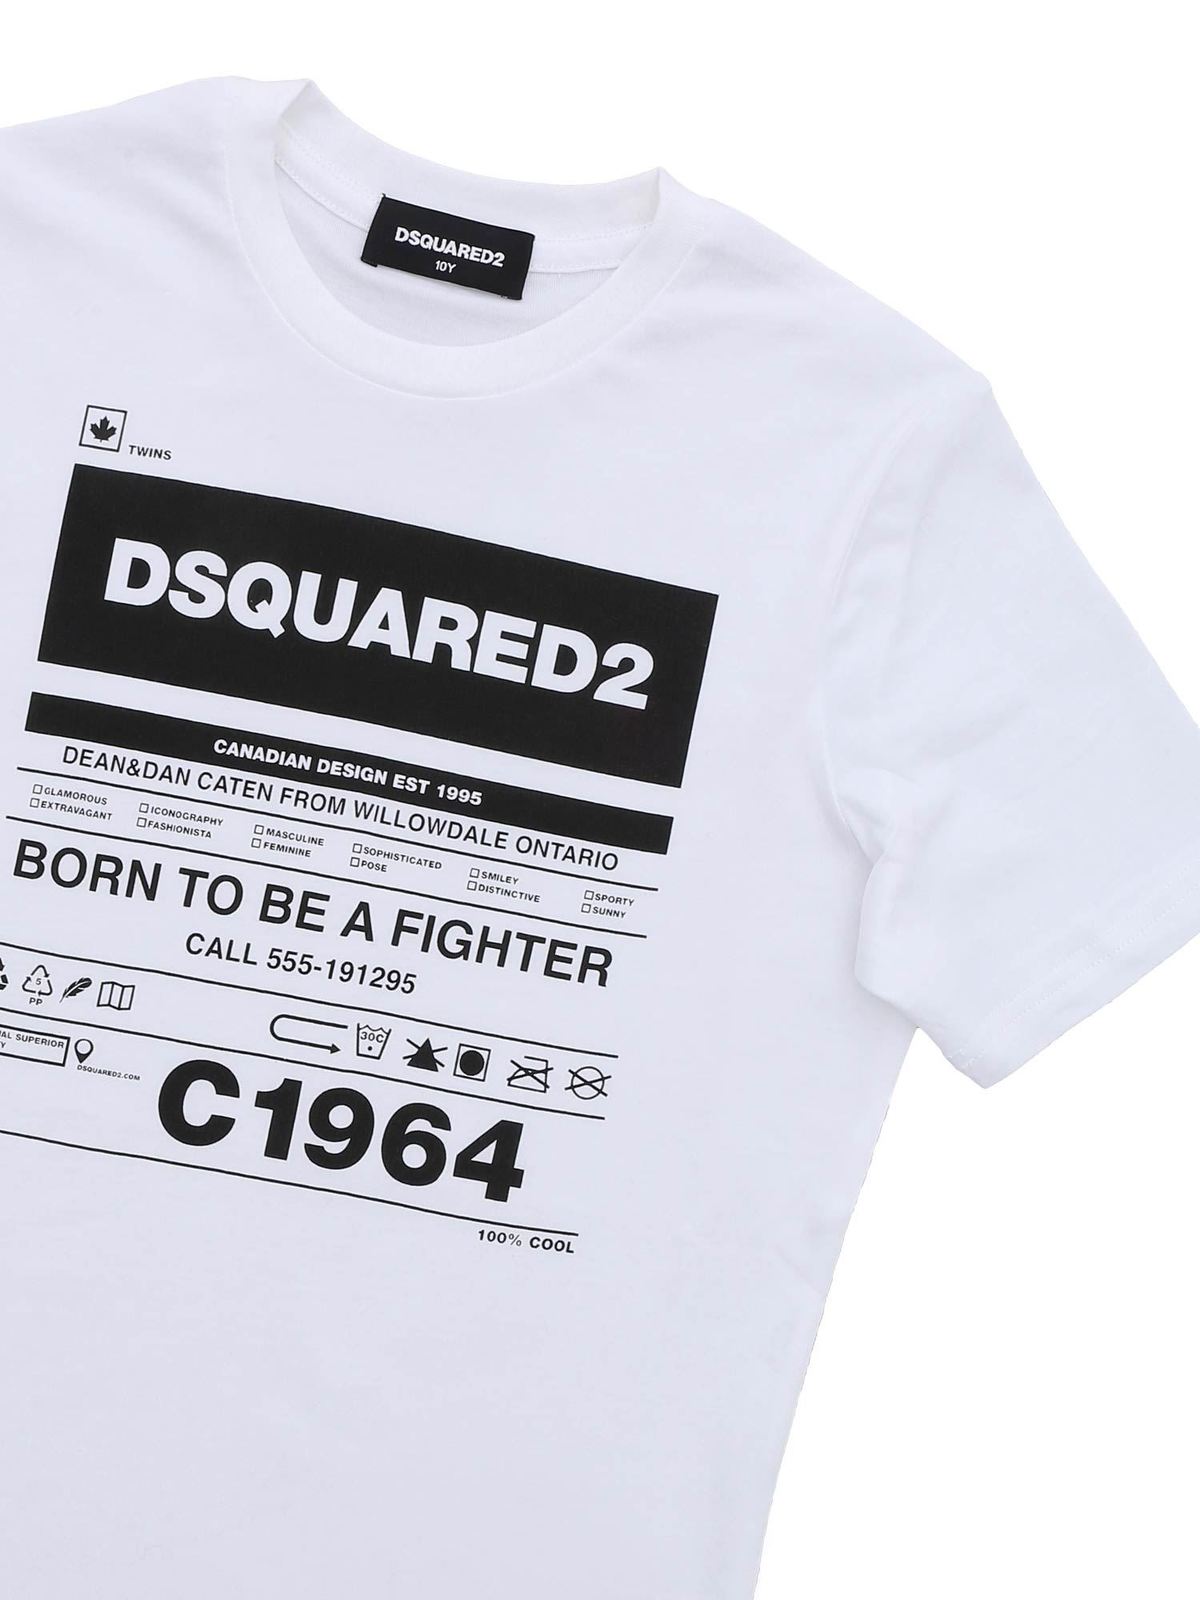 Tシャツ Dsquared2 - Tシャツ - 白 - DQ044JD00YRDQ100 | THEBS [iKRIX]